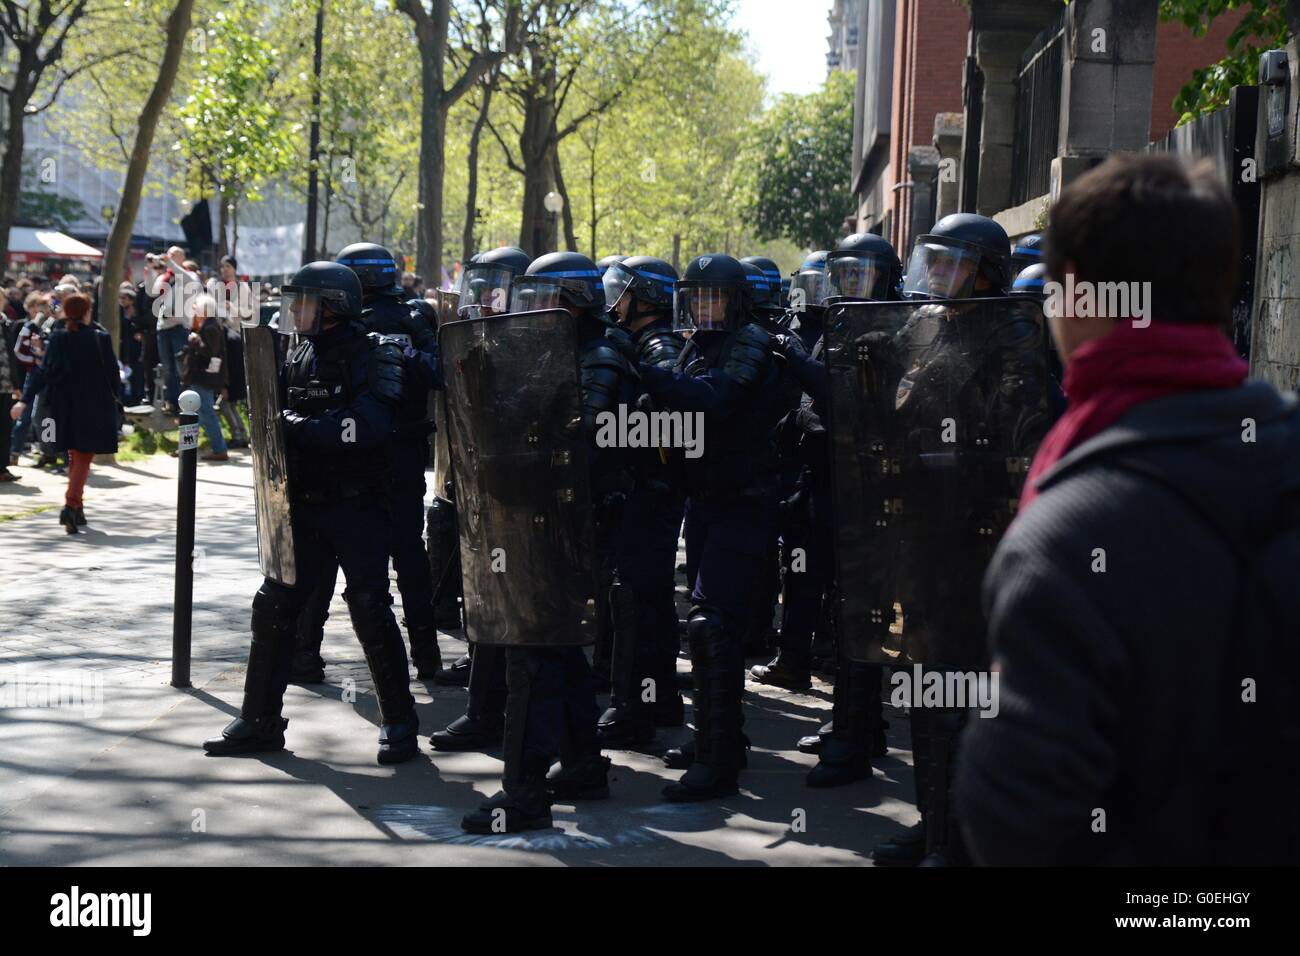 Paris, France. 1 May 2016. Riot police face off against a hostile crowd. Credit: Marc Ward/Alamy Live News Stock Photo